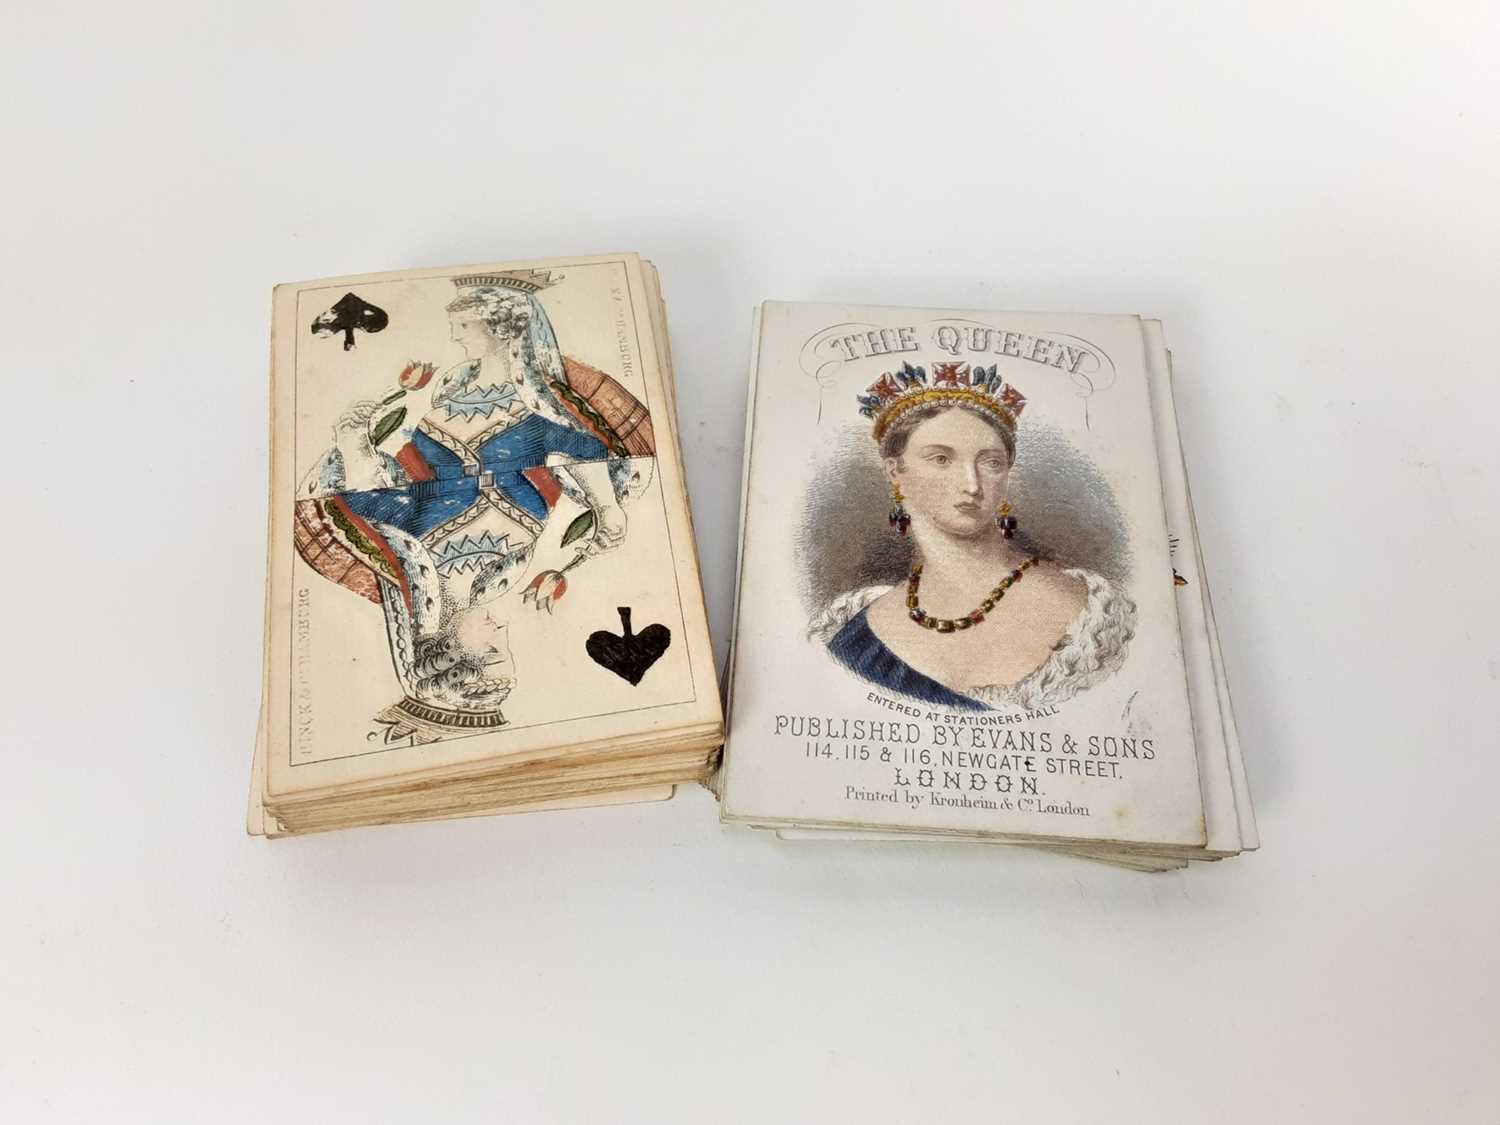 Two sets of 19th century playing cards, including a set without suits for a fancy game, published by